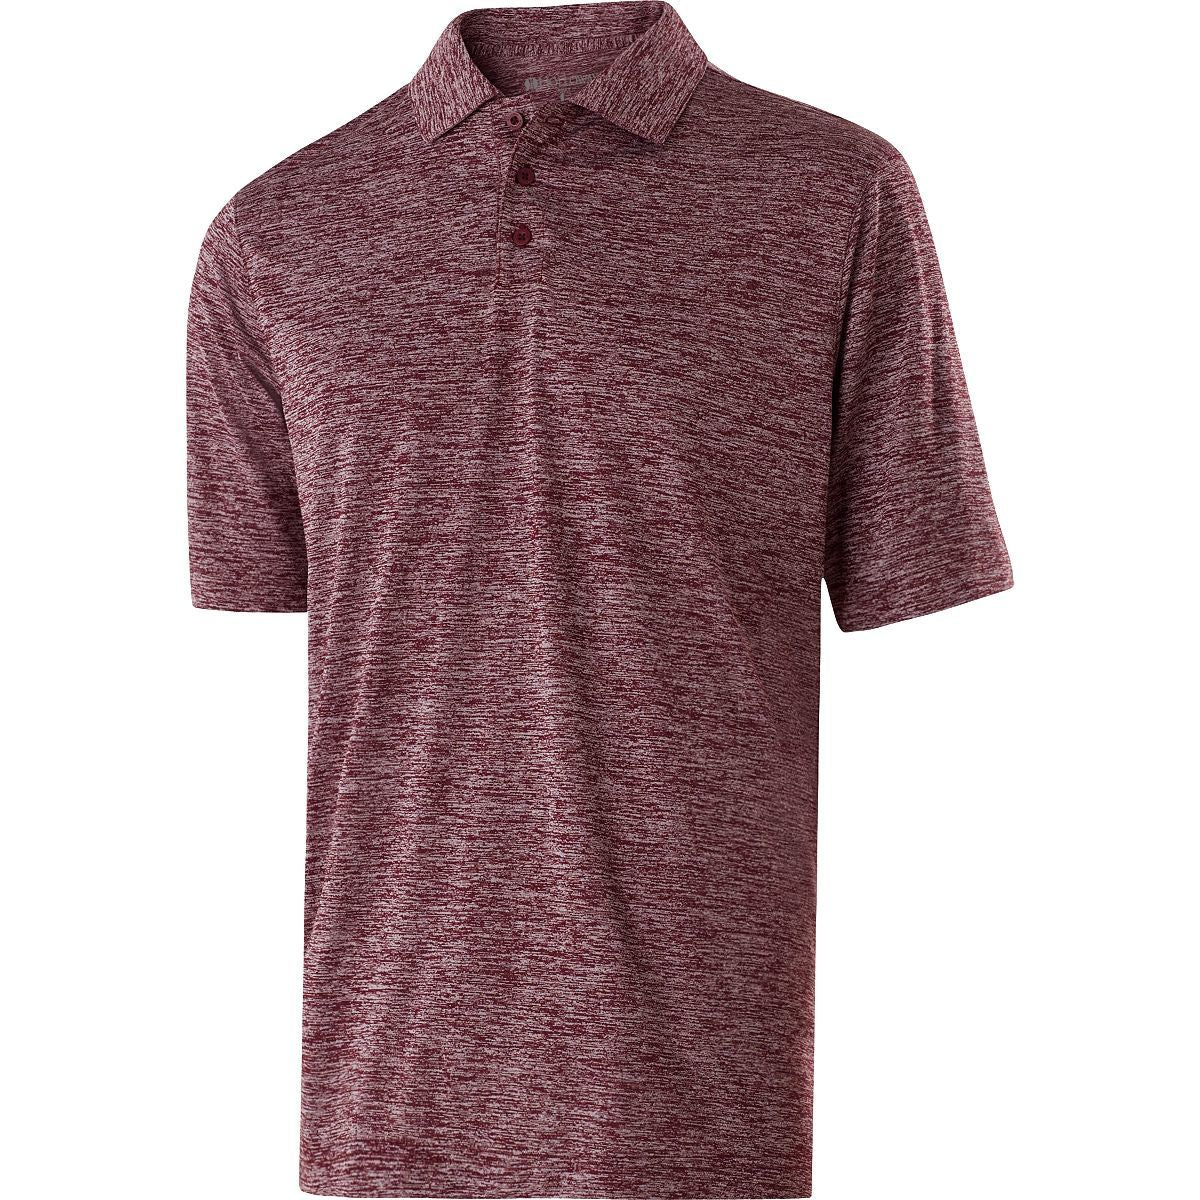 Holloway Electrify 2.0 Polo in Maroon Heather  -Part of the Adult, Adult-Polos, Polos, Holloway, Shirts product lines at KanaleyCreations.com